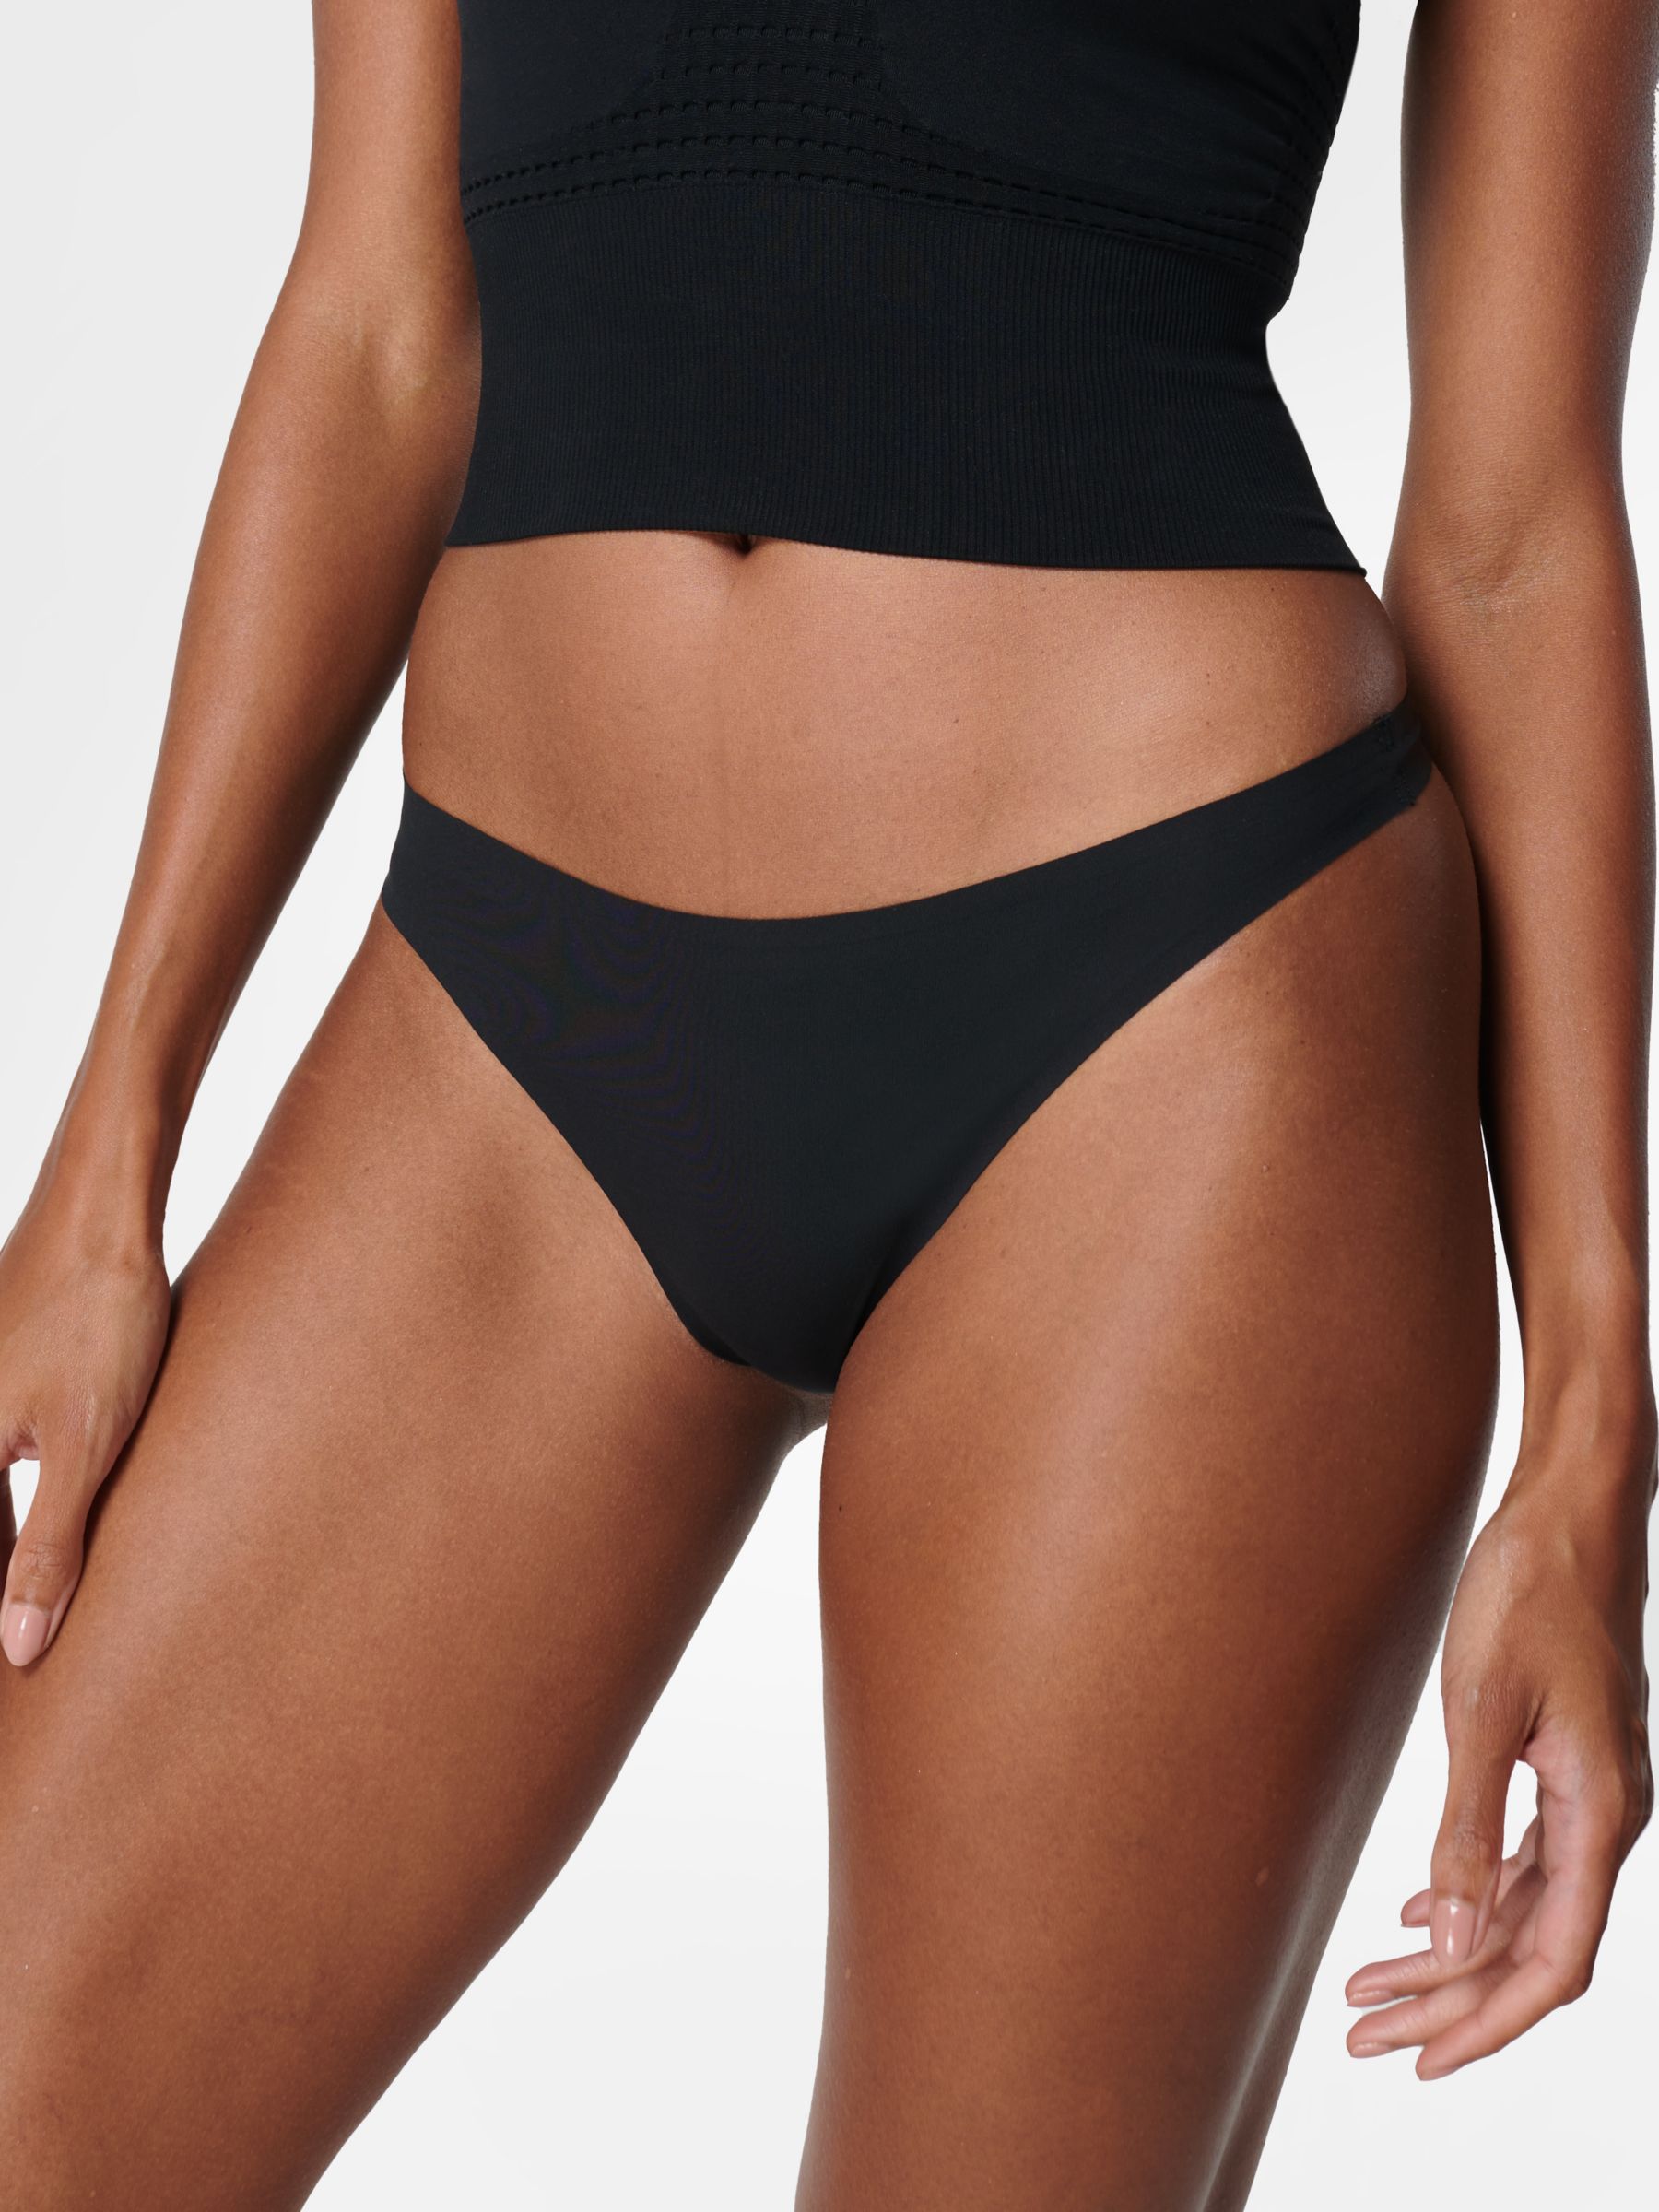 Sweaty Betty Barely There Thong, Black, M